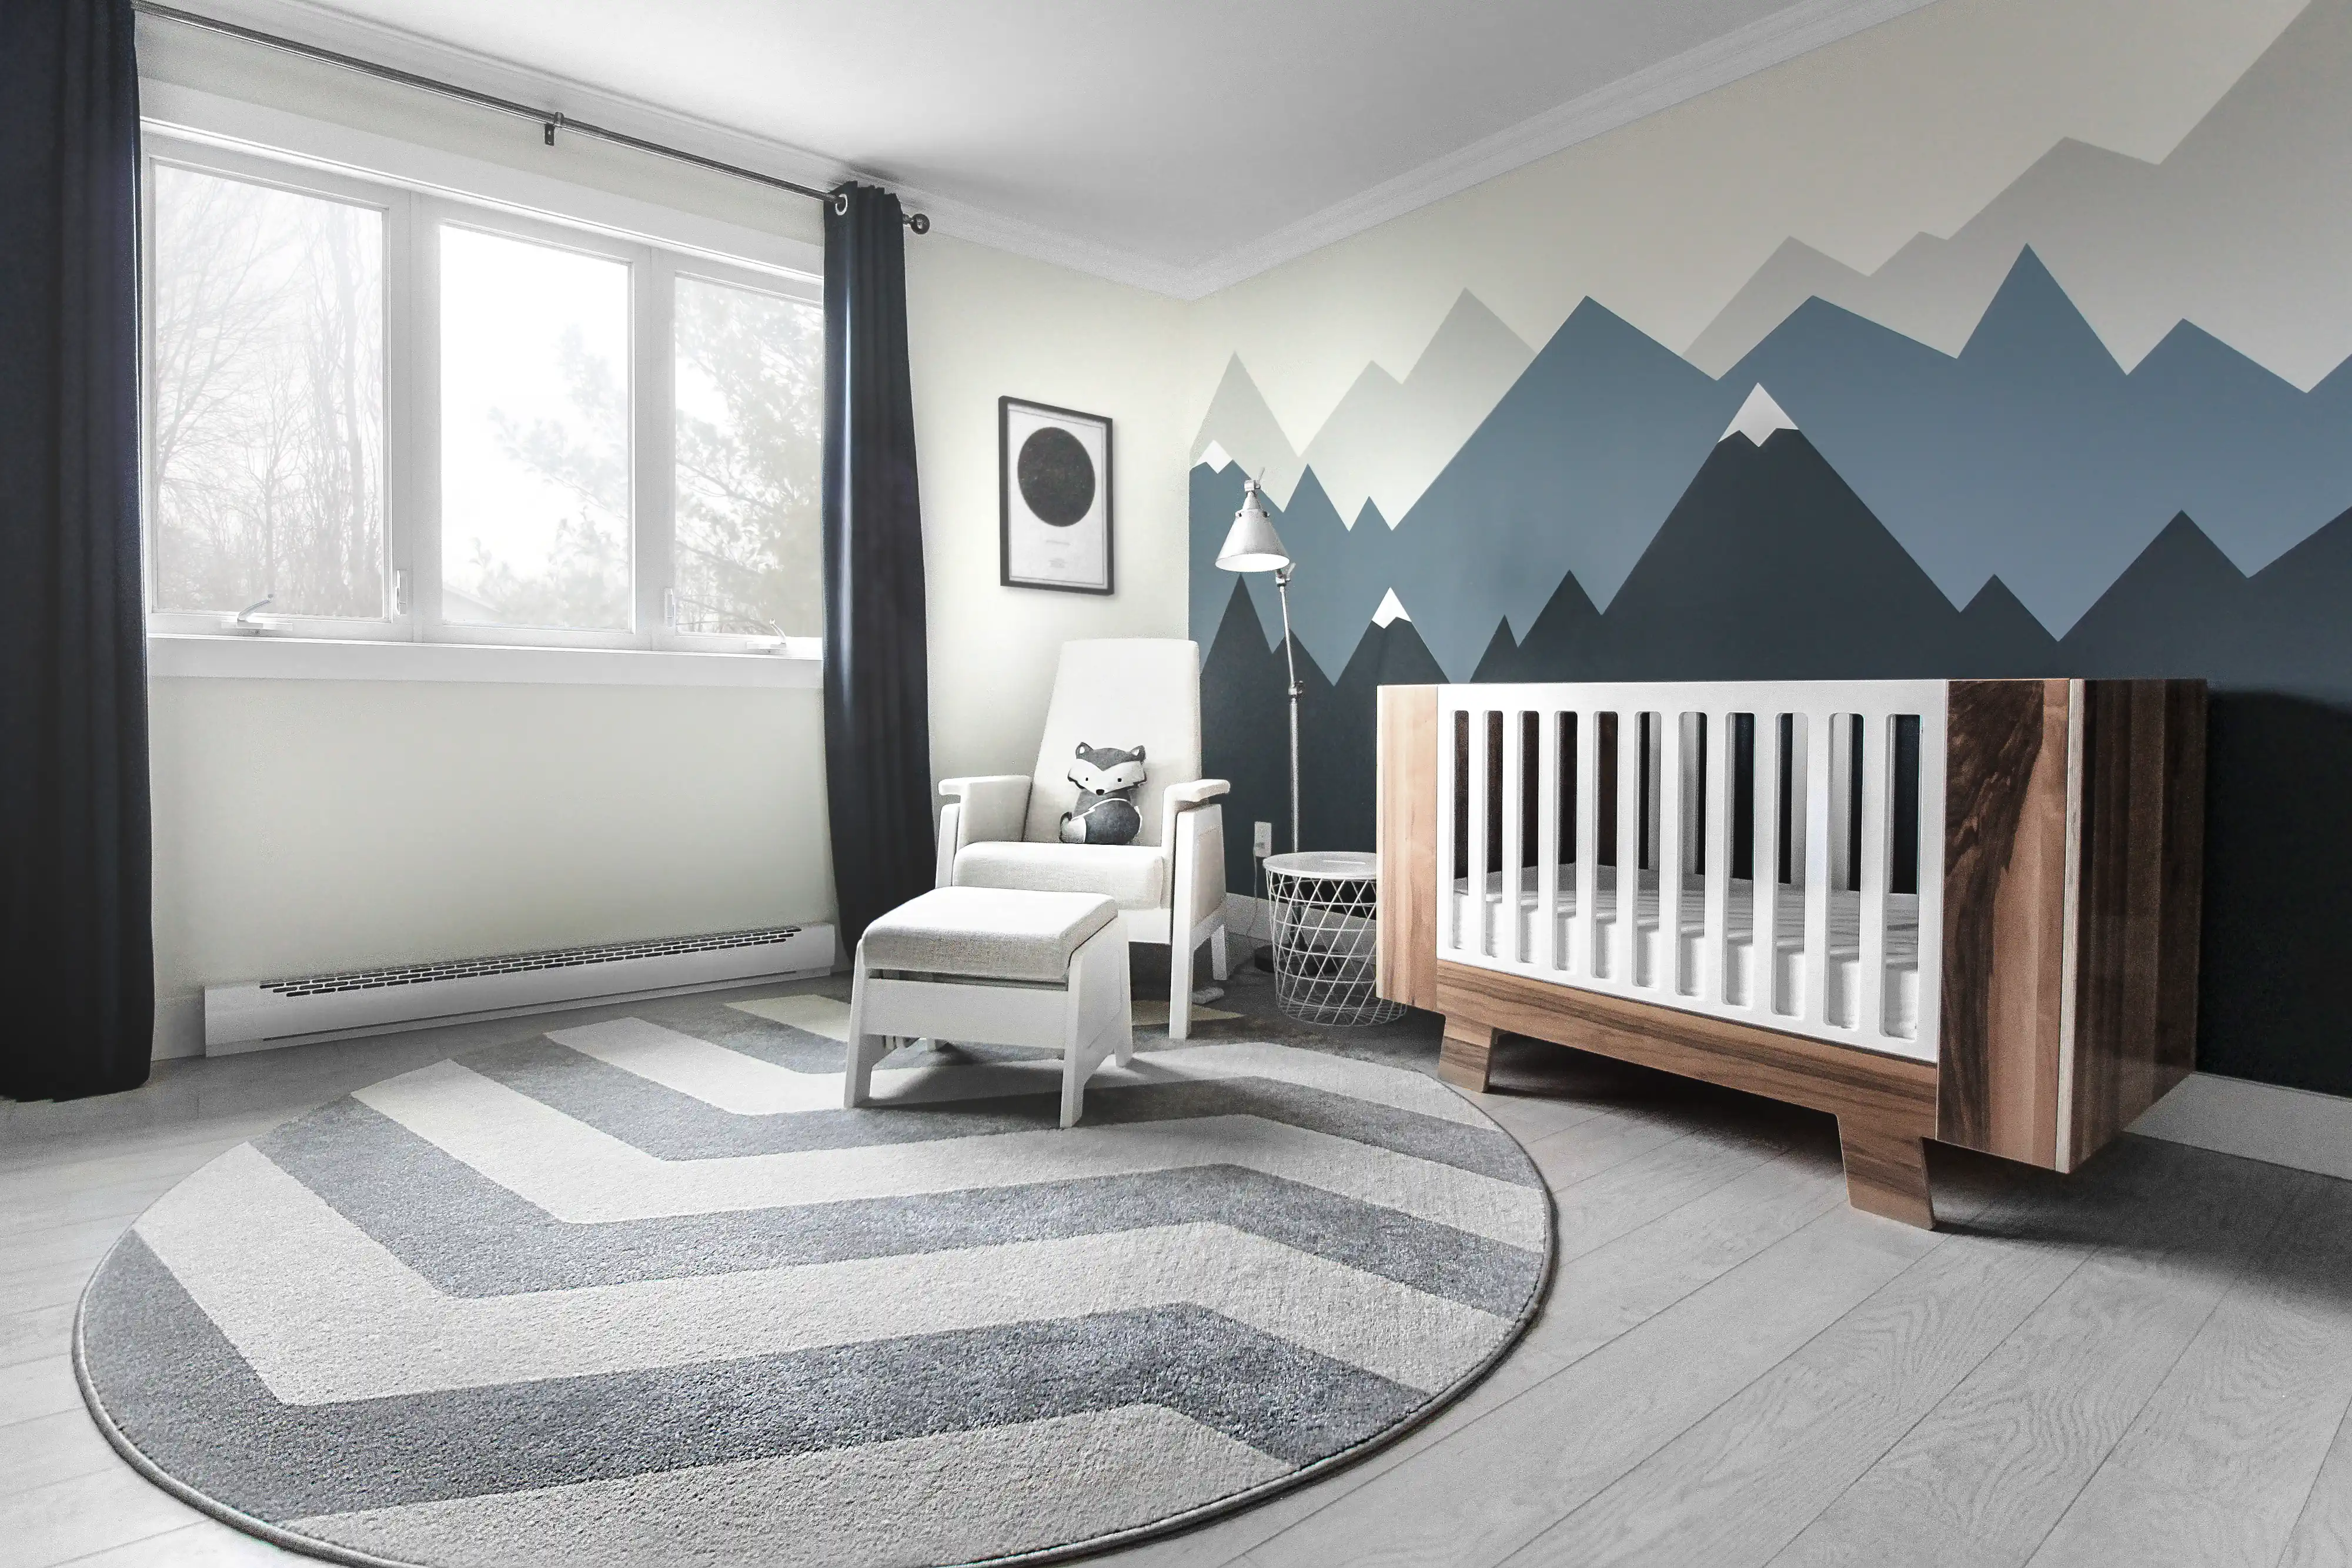 Modern nursery room with a blue and white mountain mural, a wooden crib, and a gray armchair, interior by Sarah Brown Design